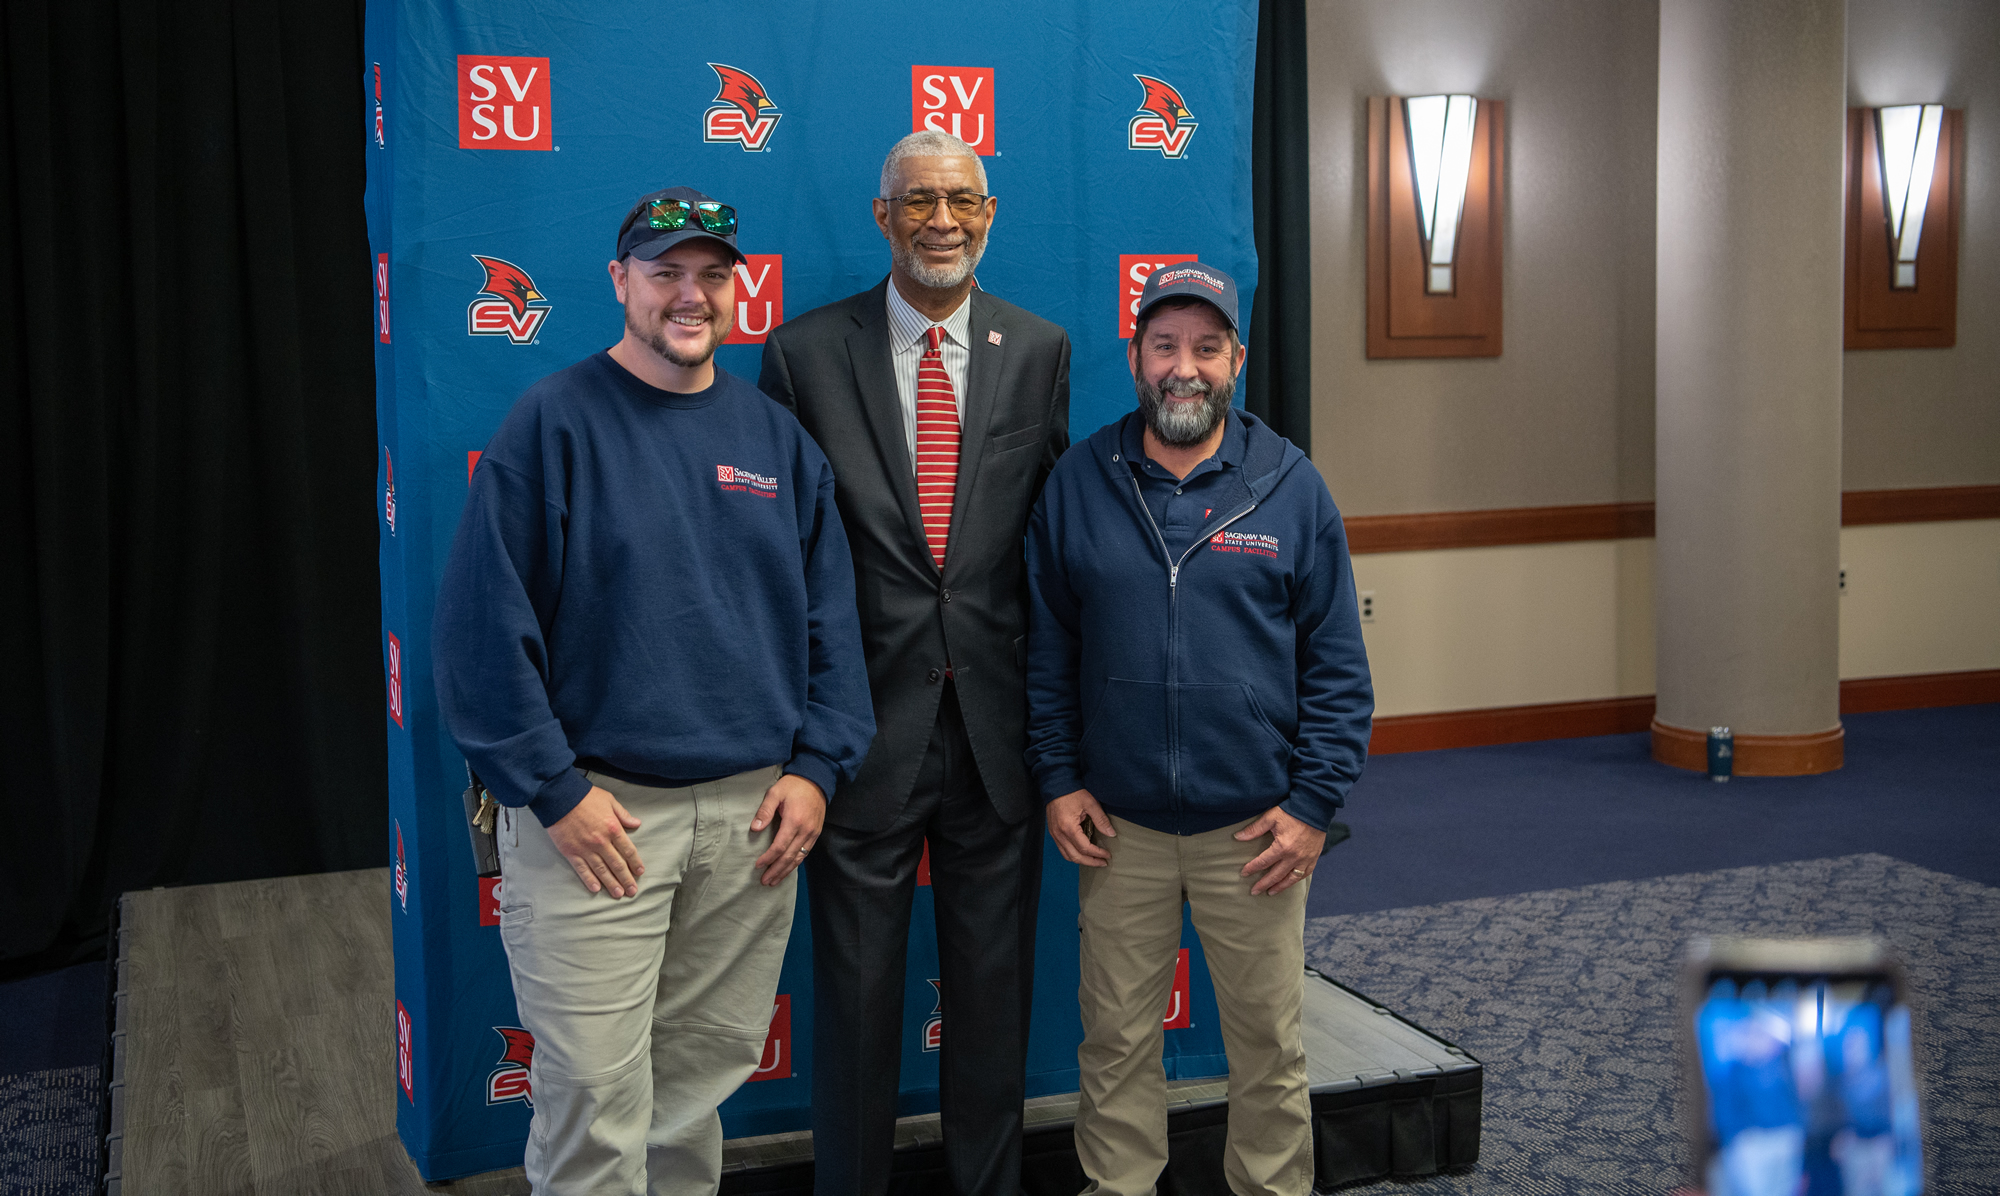 George Grant Jr. posing for a photo with two SVSU Faculty and Staff